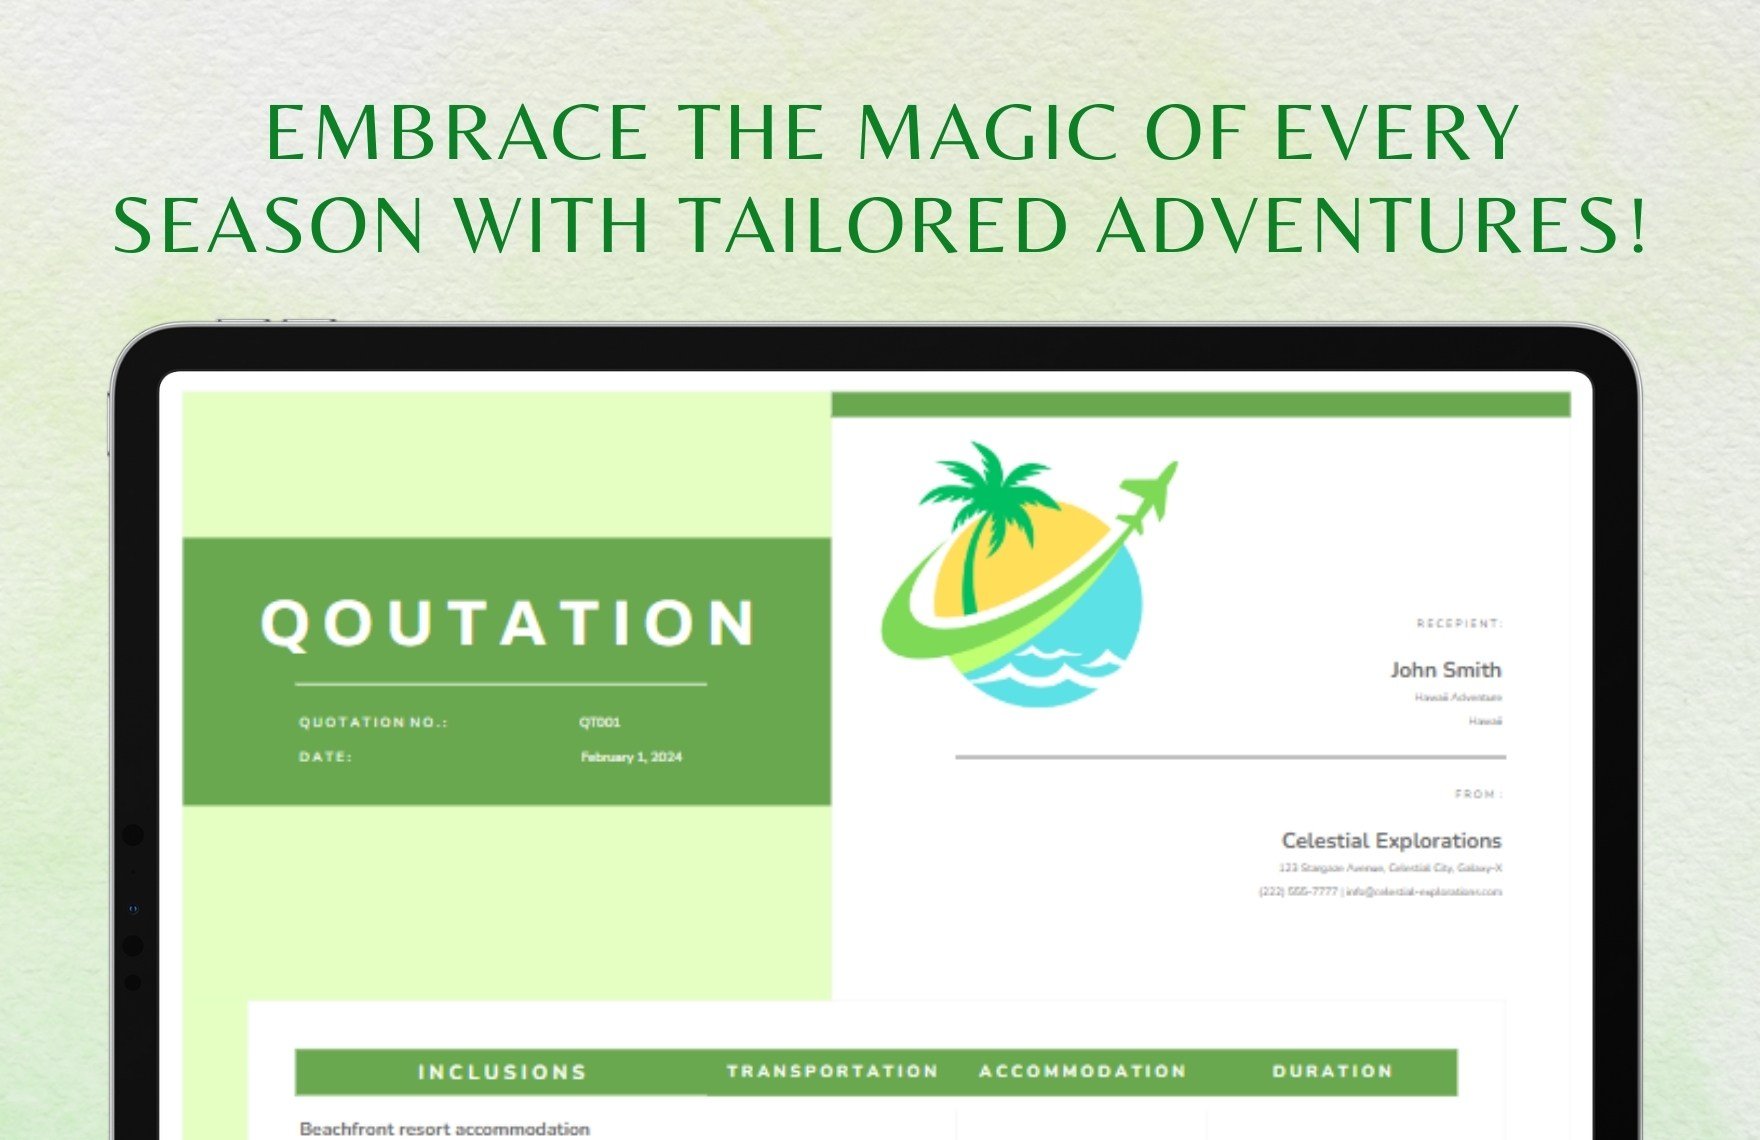 Seasonal Travel Package Quotation Template